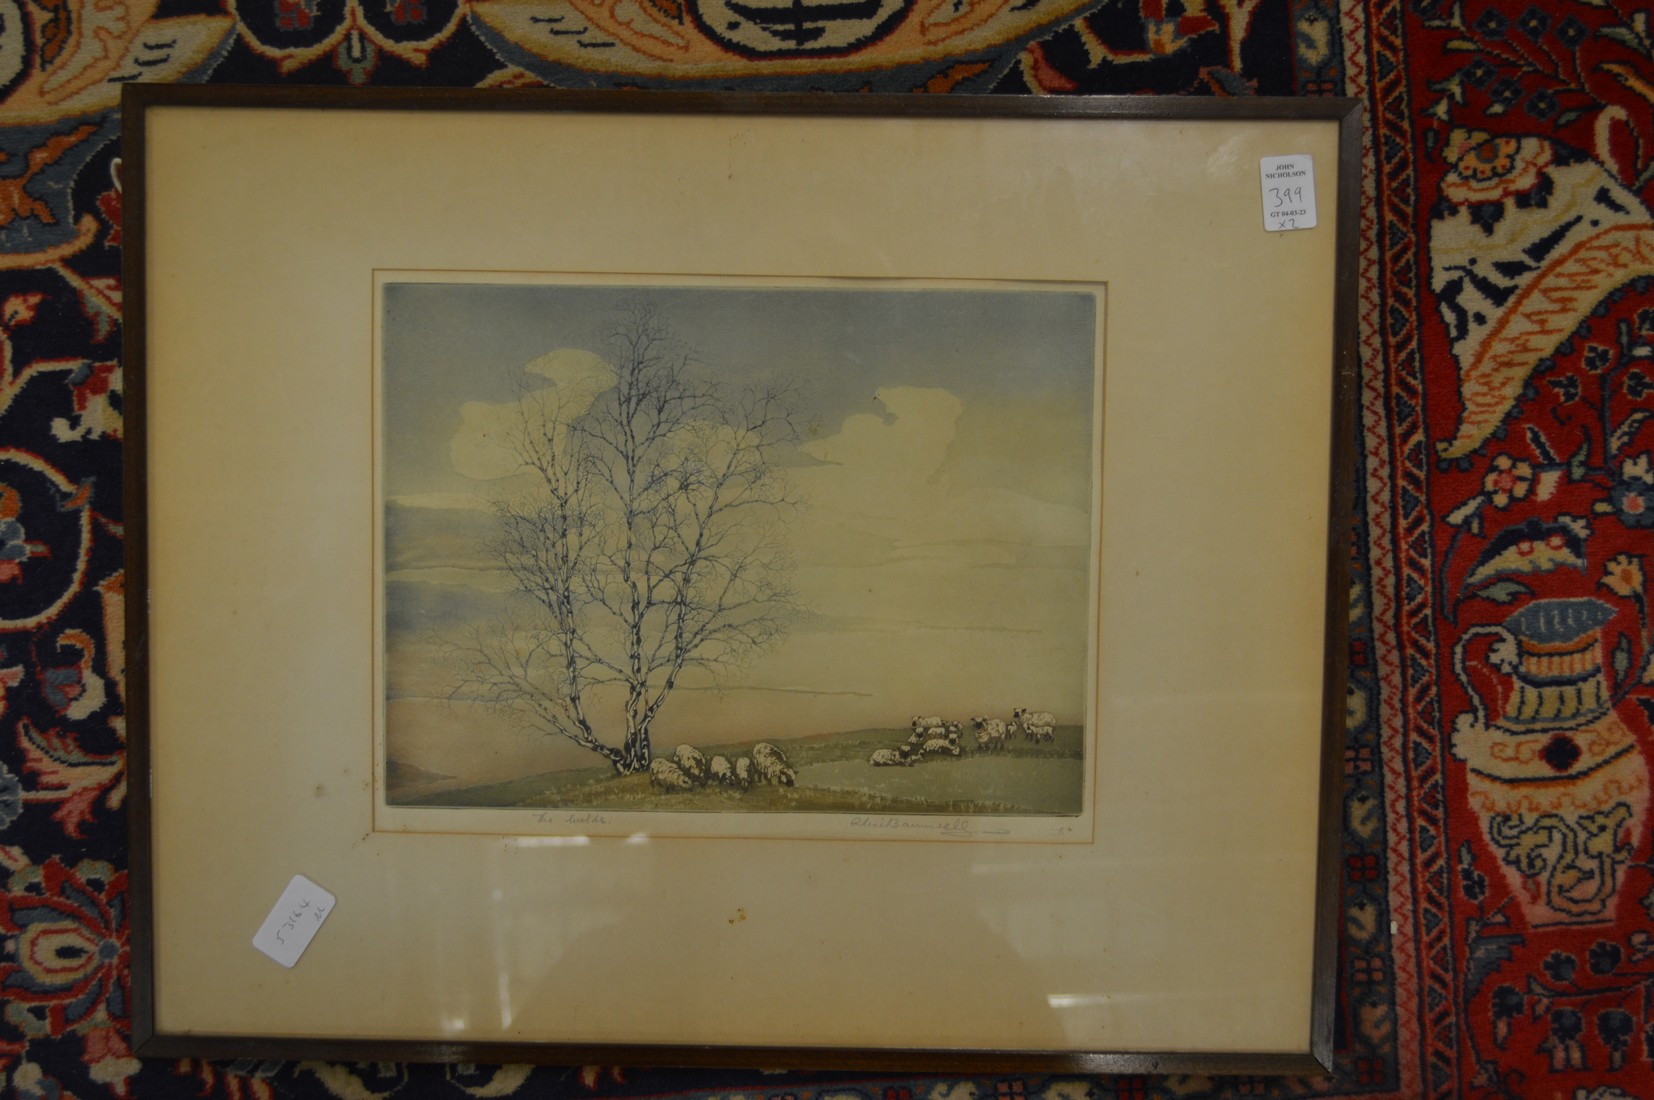 A colour print of Loseley house and an engraving of sheep. - Image 2 of 2